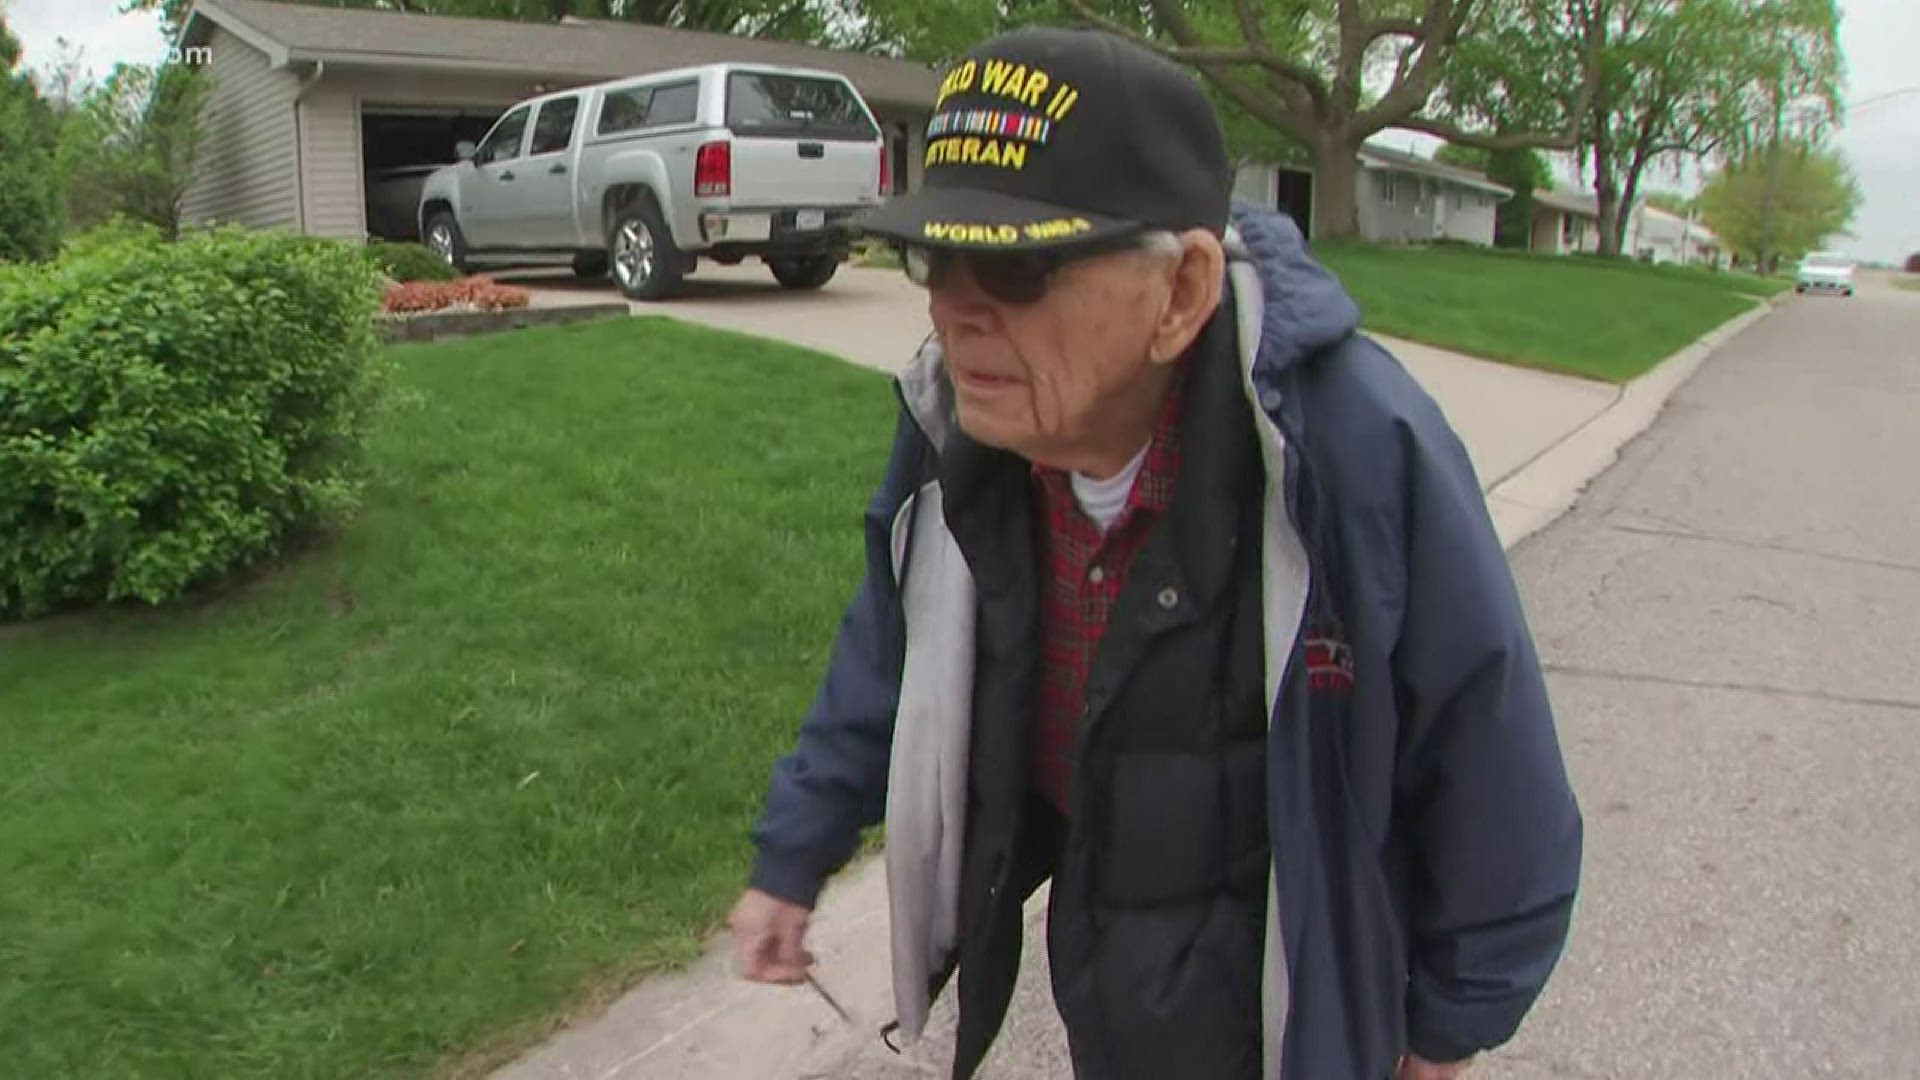 Inspired by another veteran his age in England, Mickey Nelson is walking and raising money for the Salvation Army